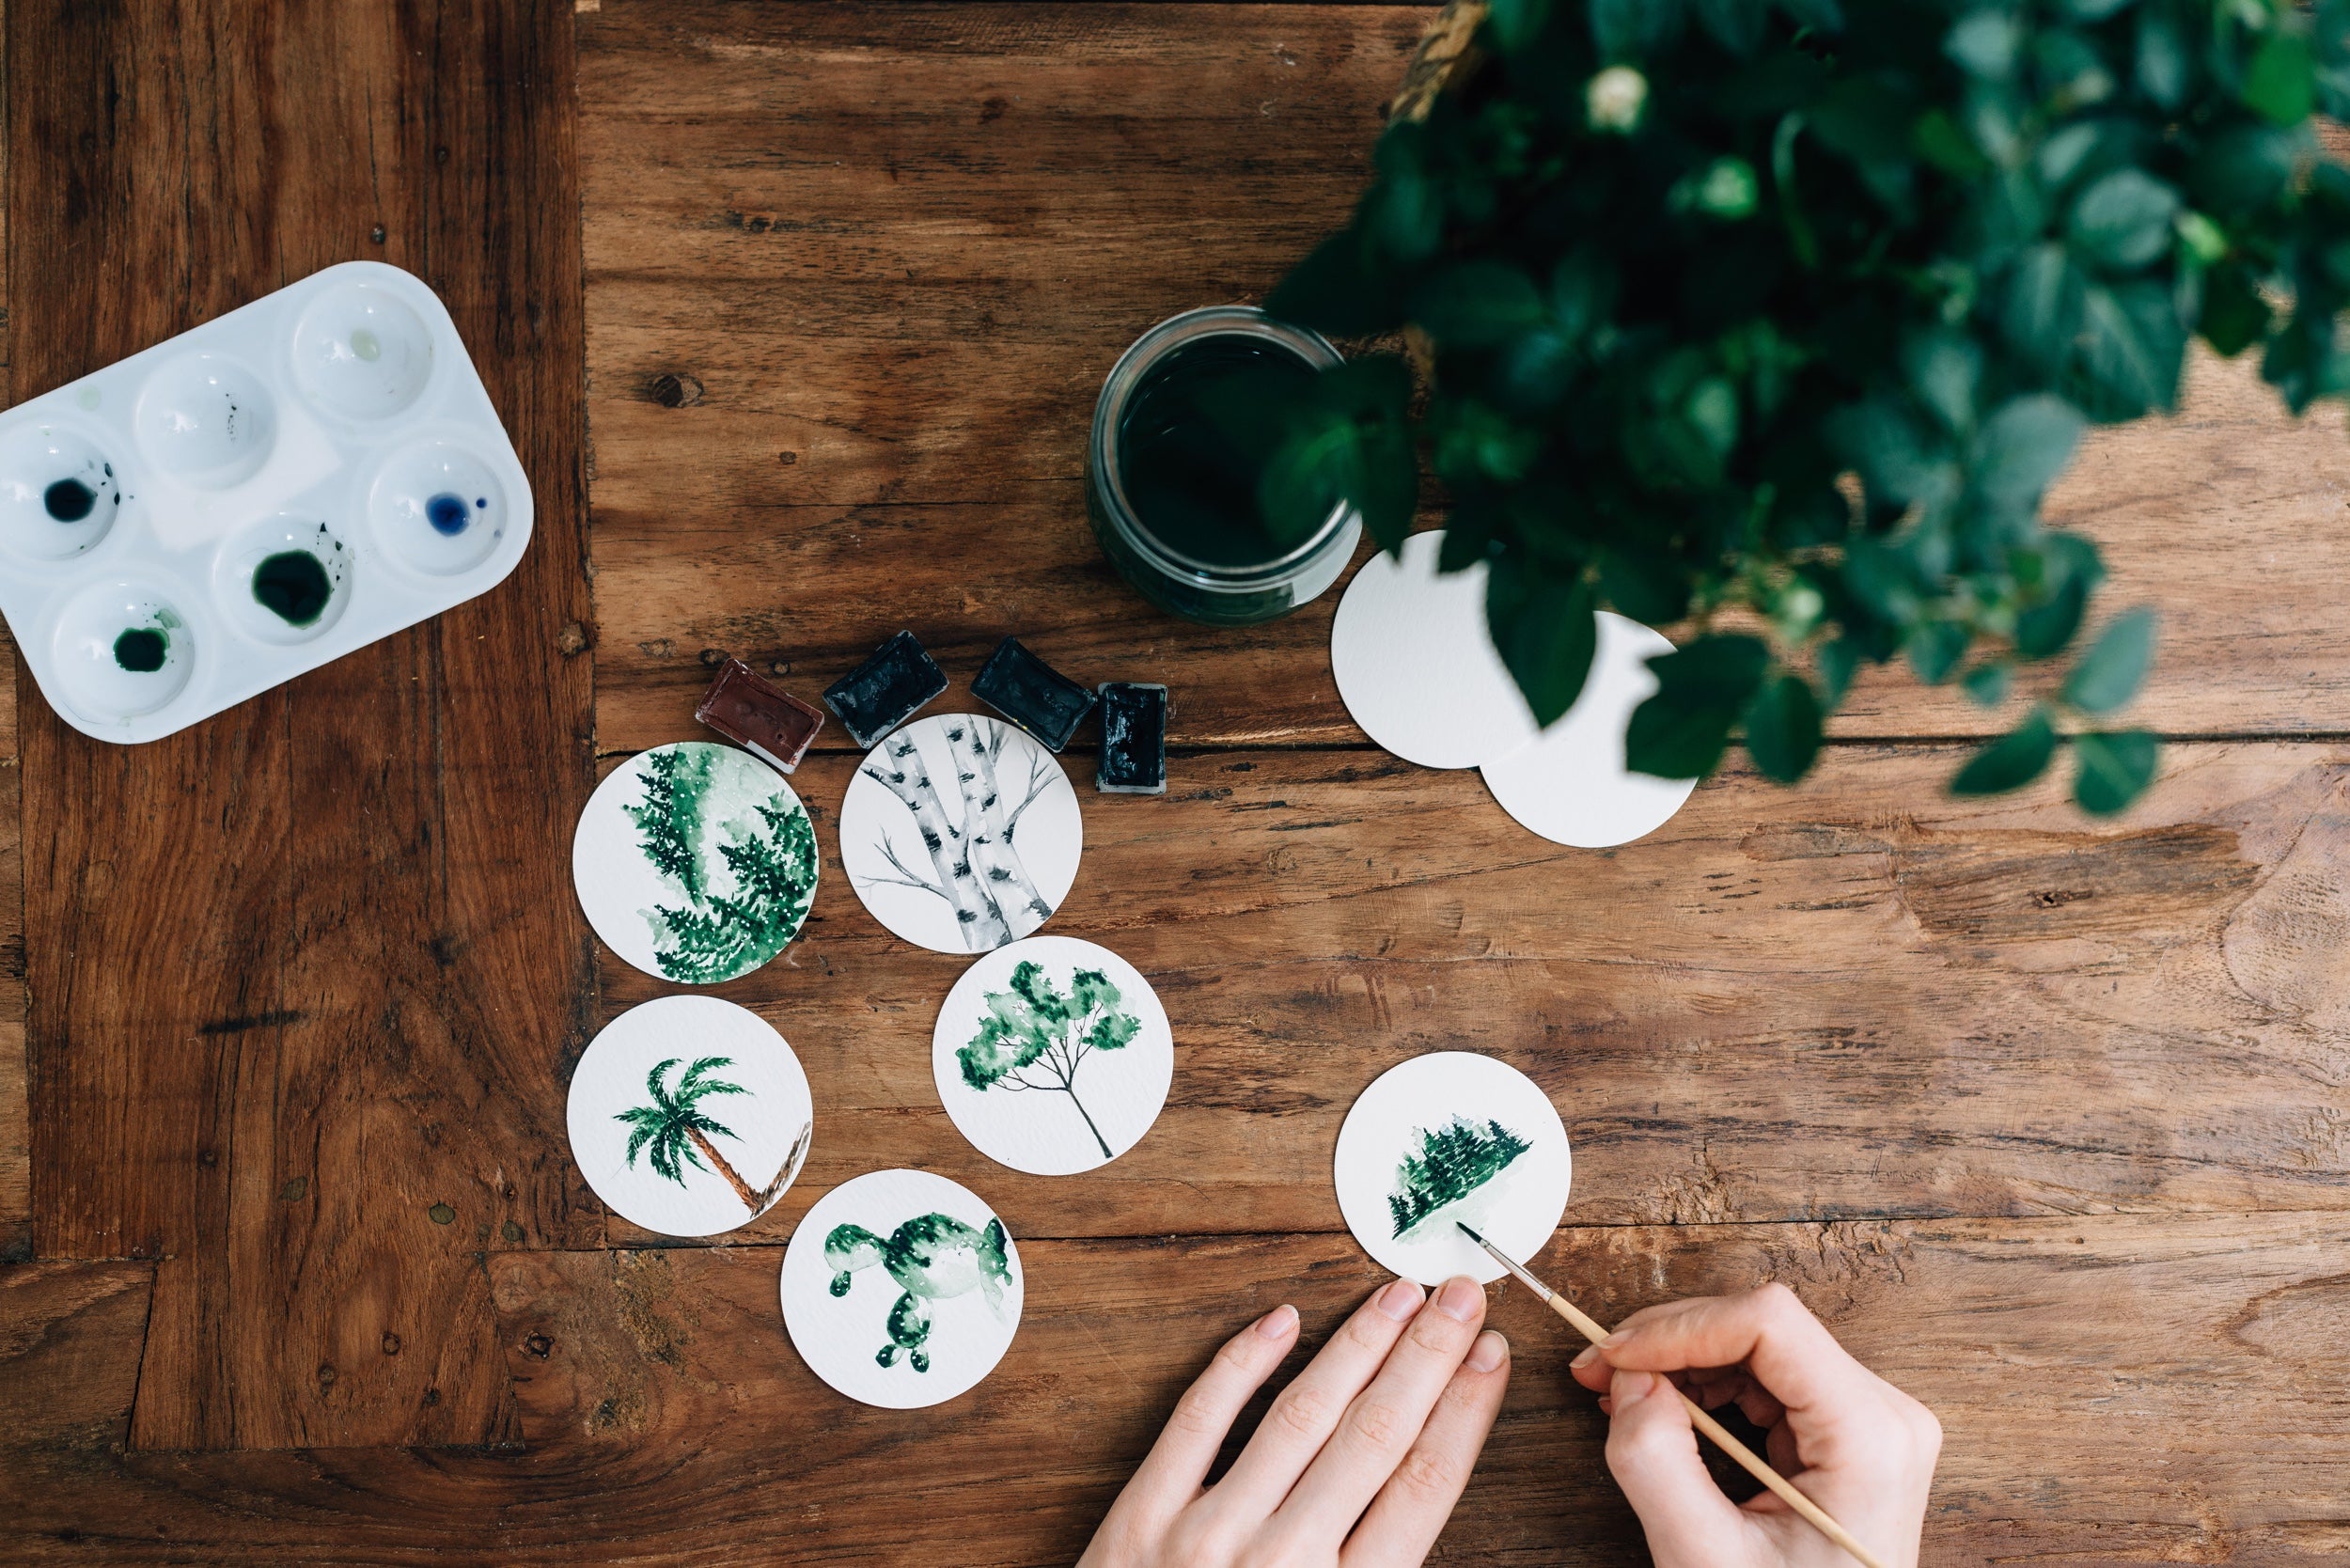 How To Turn a Hobby Into a Business in 8 Steps - Shopify Canada